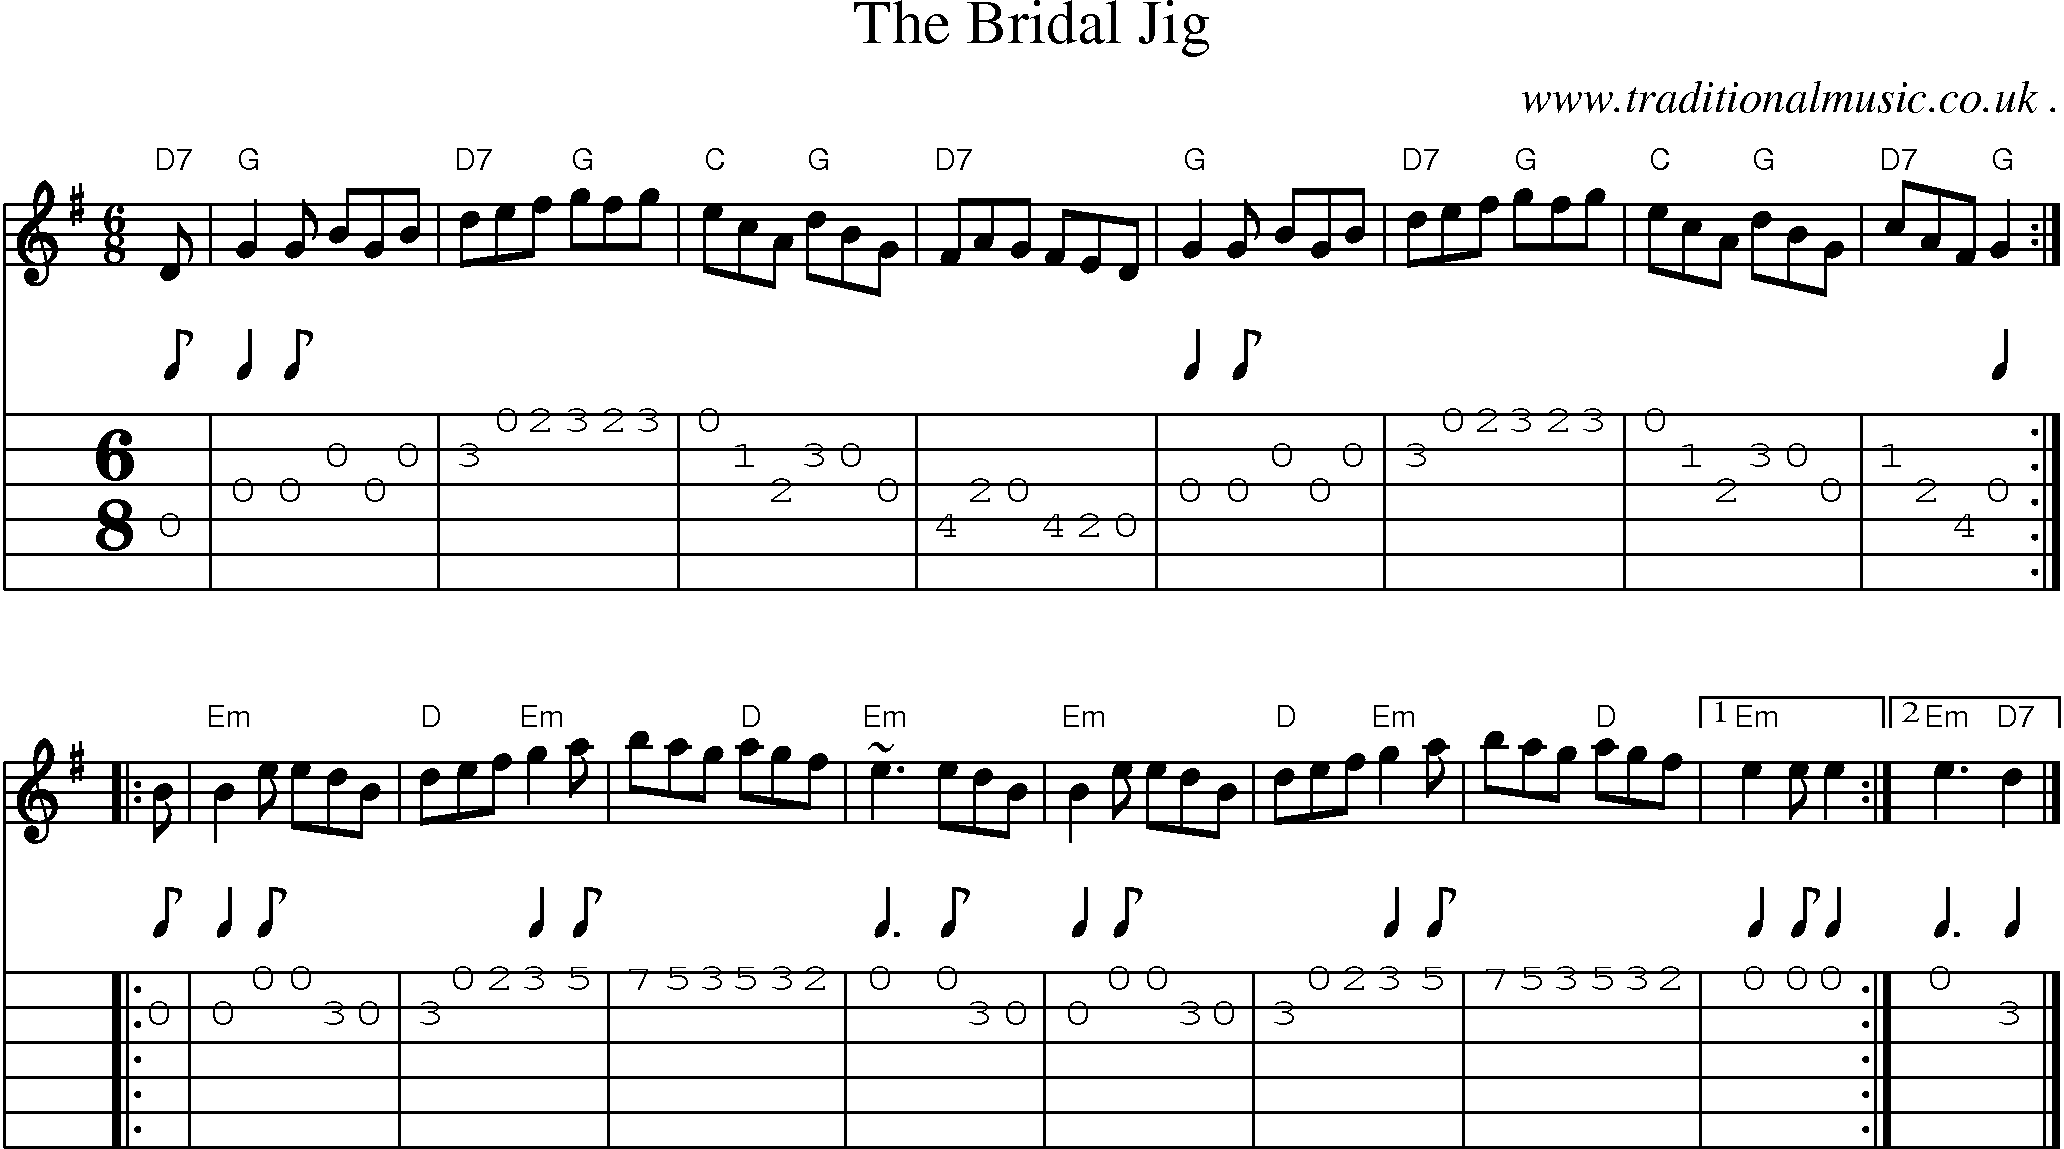 Sheet-music  score, Chords and Guitar Tabs for The Bridal Jig